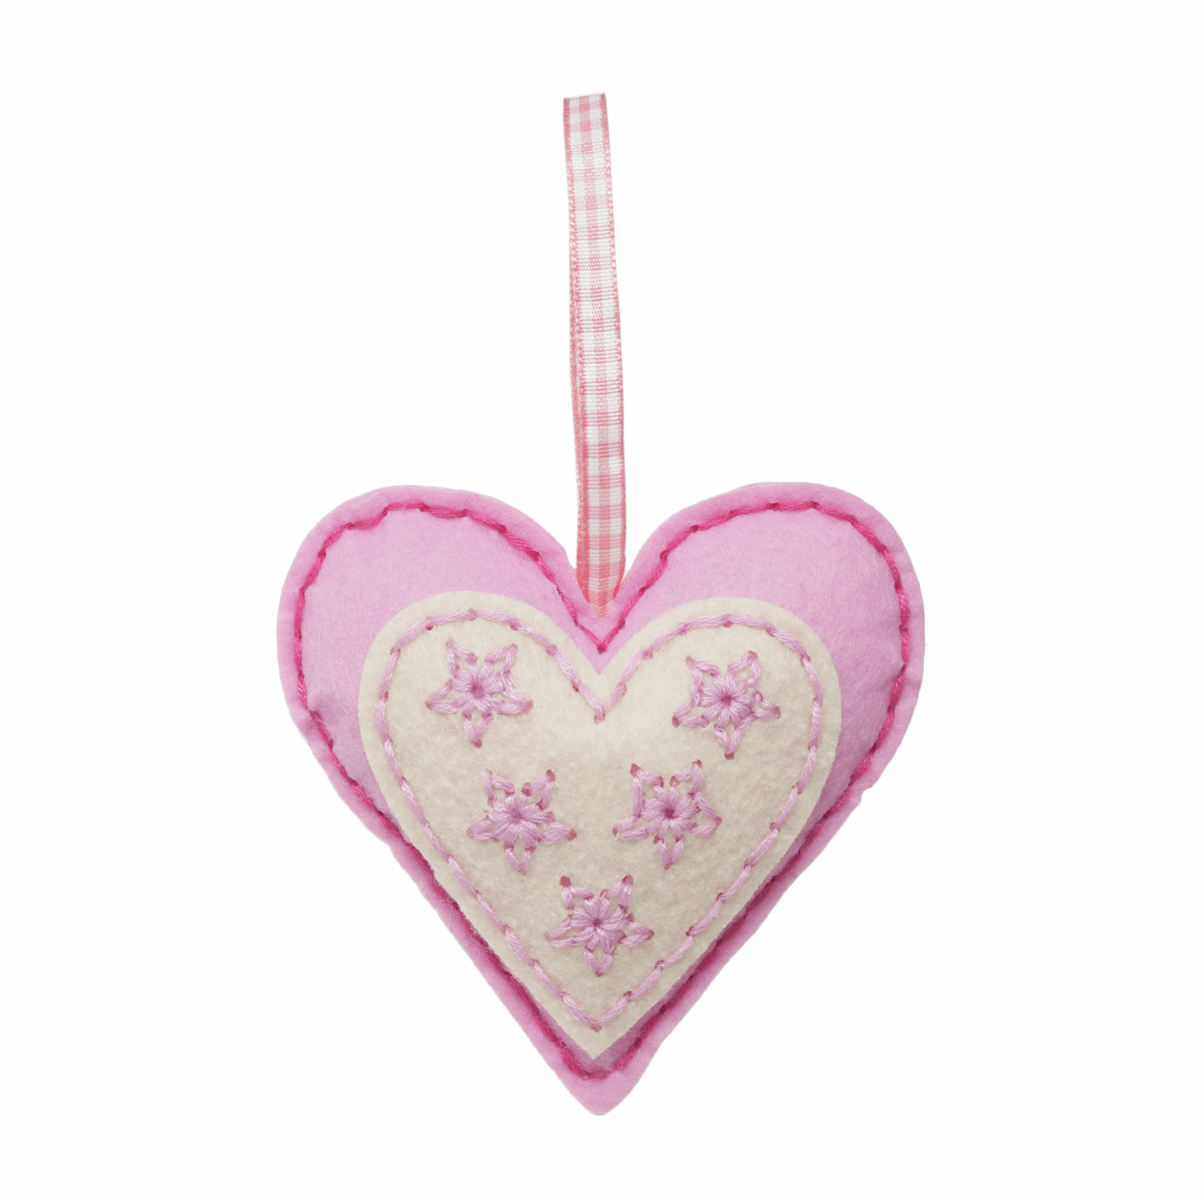 Gift Idea - Make Your Own Heart Decoration Kit by Trimits